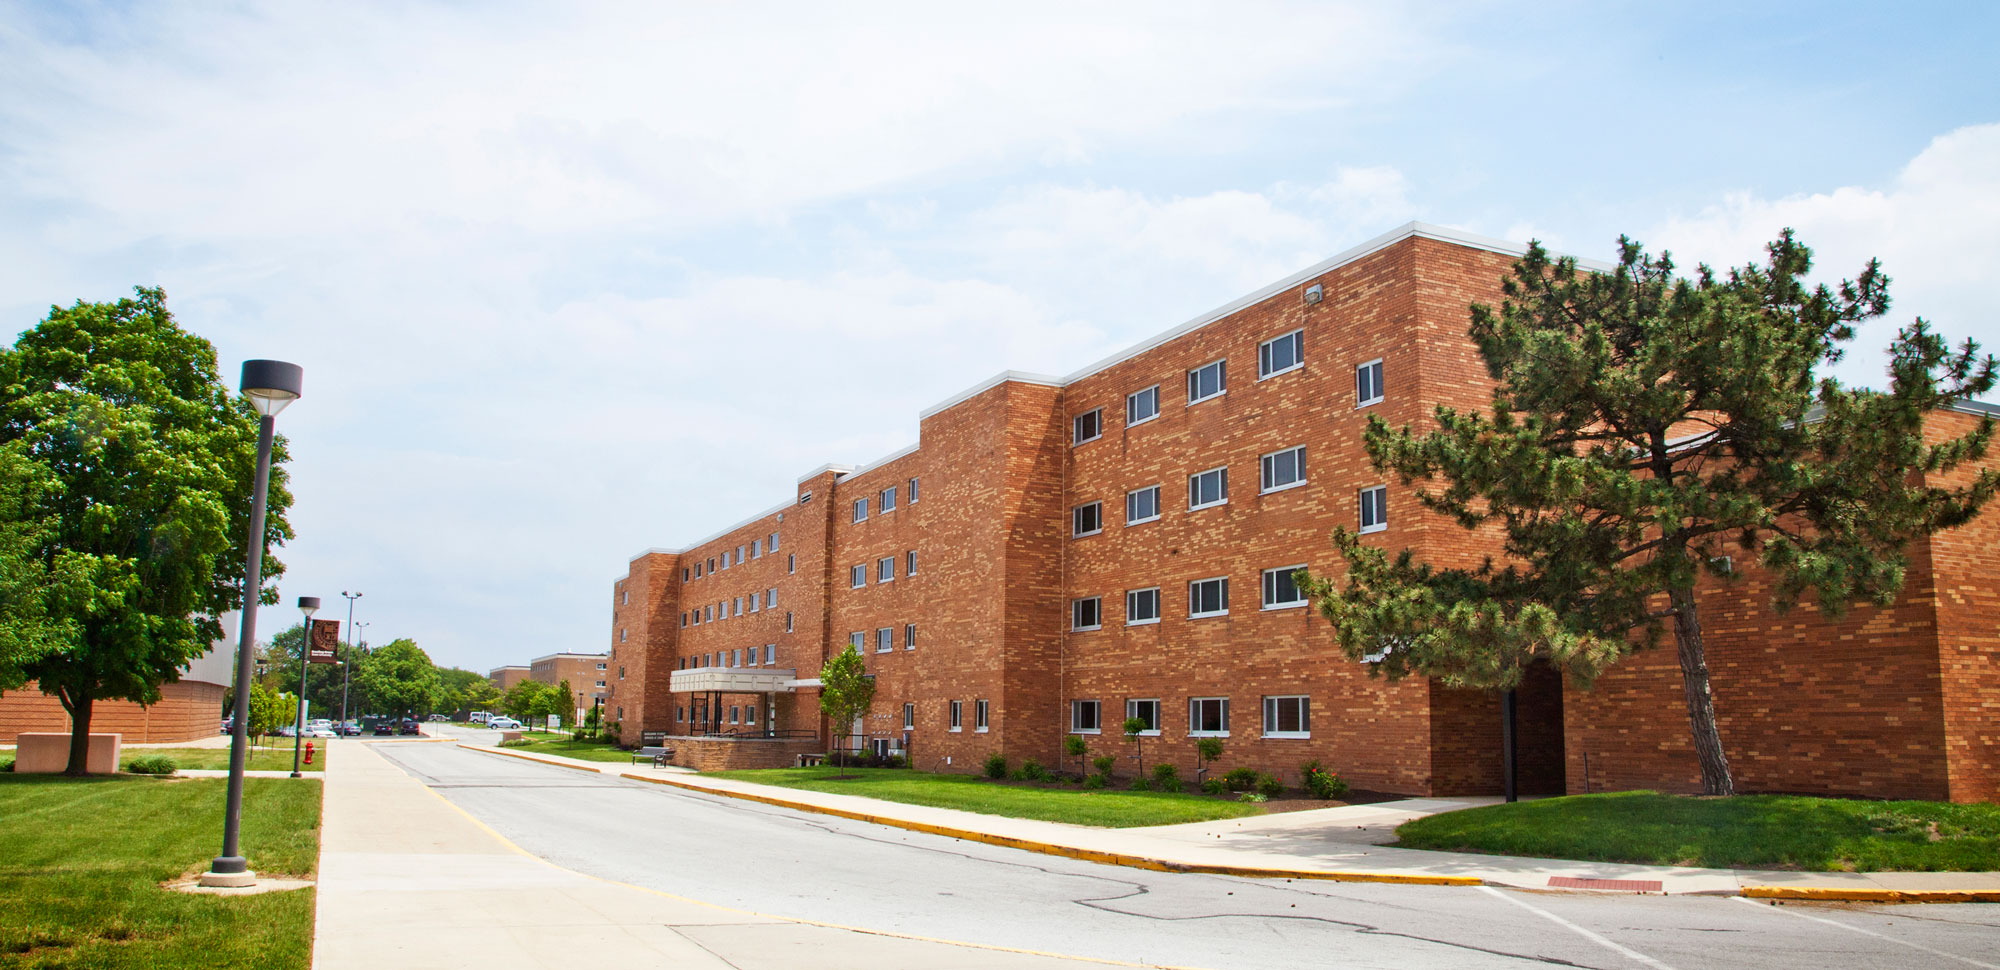 Exterior Image of Conklin Hall on a sunny day.